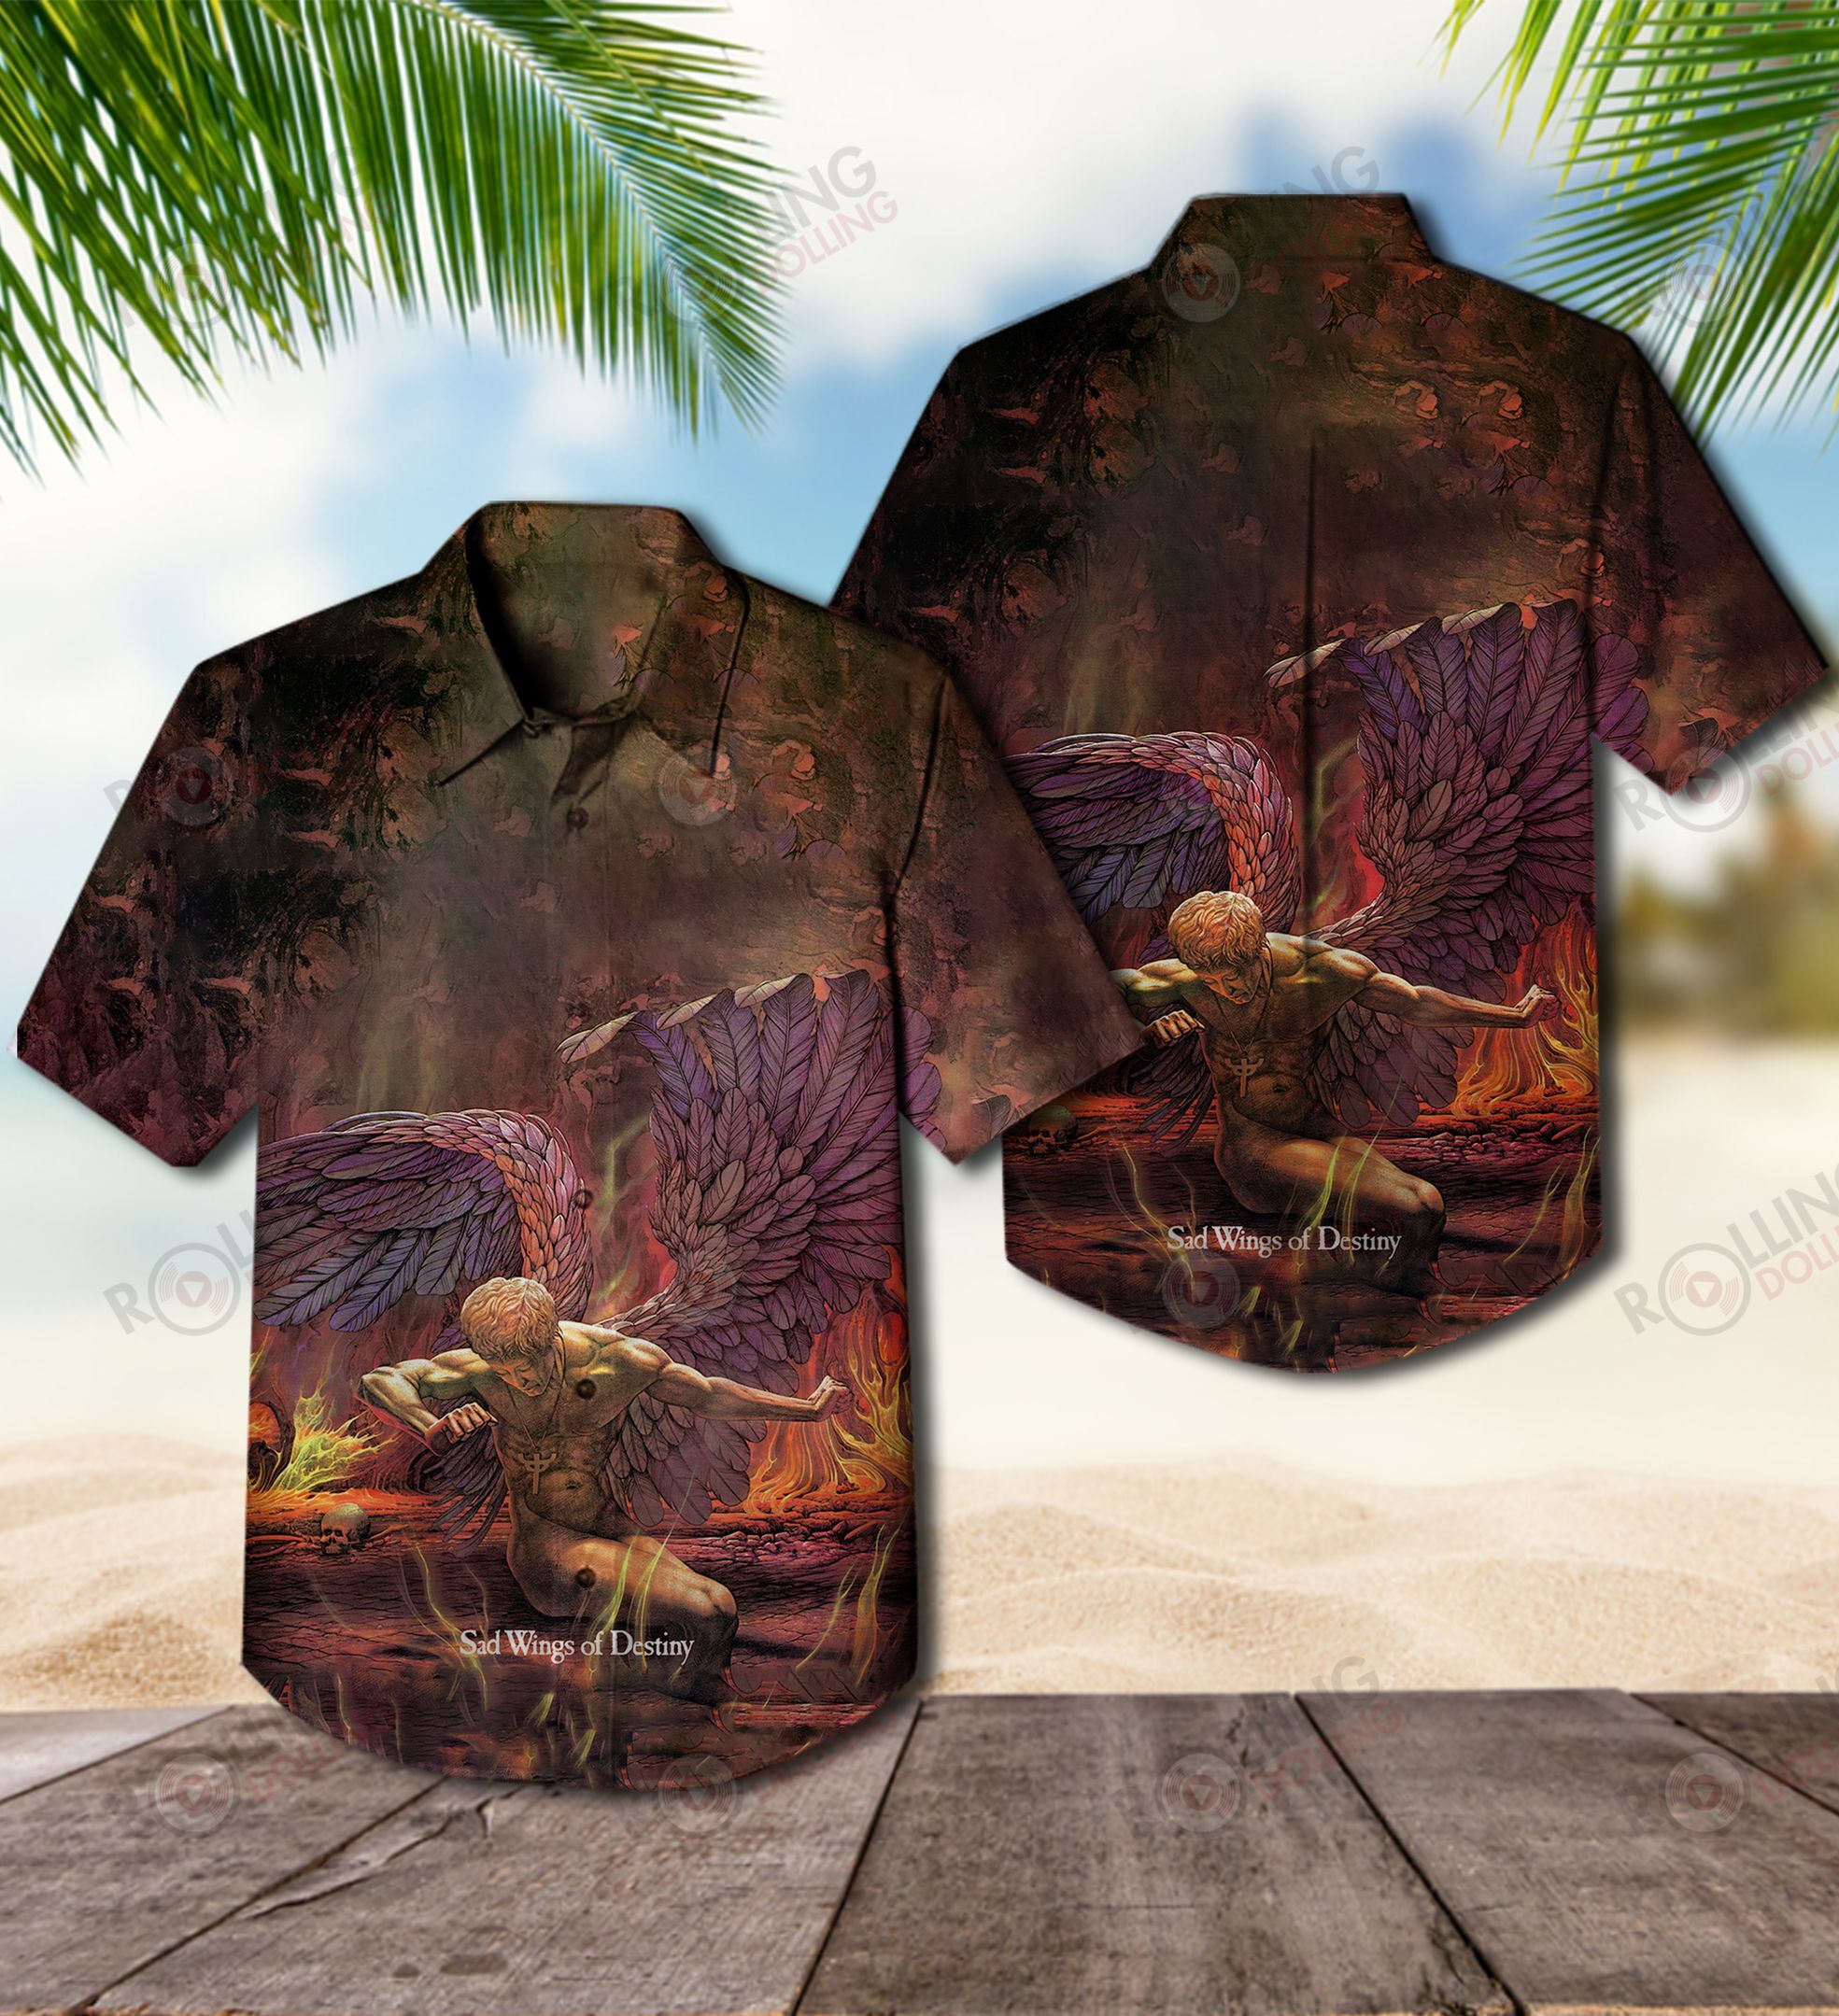 For summer, consider wearing This Amazing Hawaiian Shirt shirt in our store 95